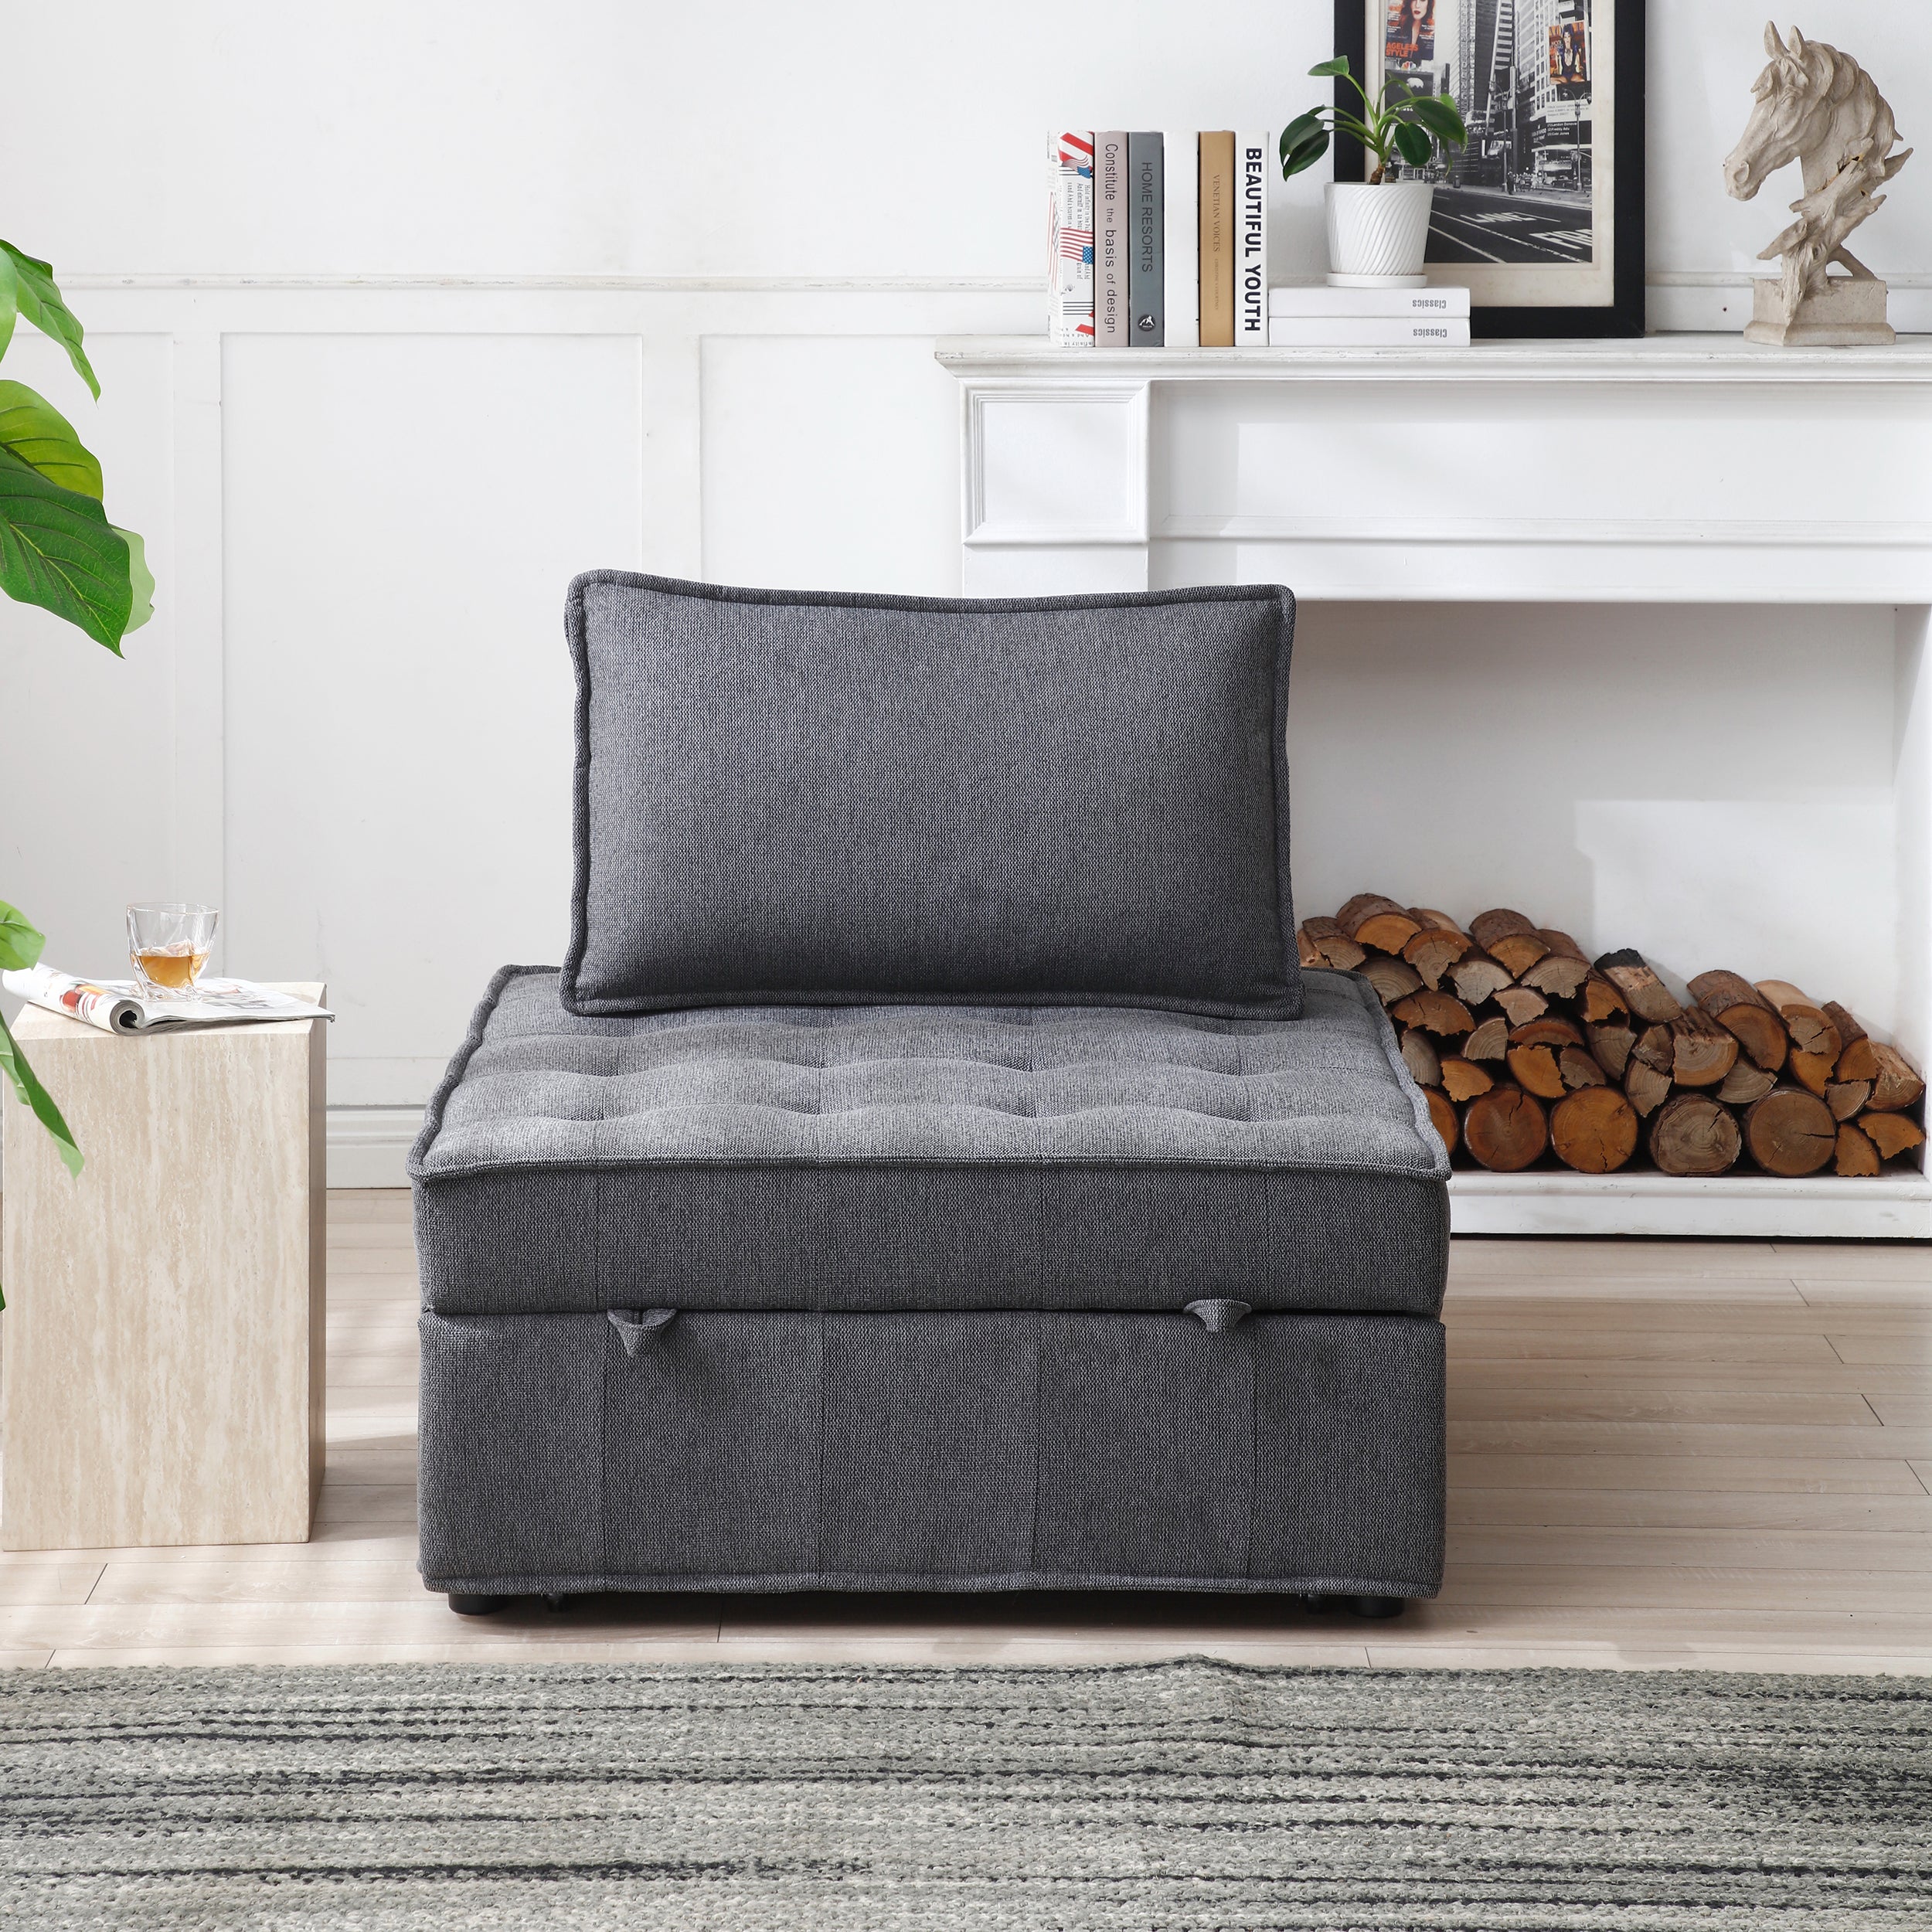 4 in 1 Pull-out Linen Fabric Sleeper Sofa Bed w/ Pillow & Side Pockets, No Armrest, Dark Gray